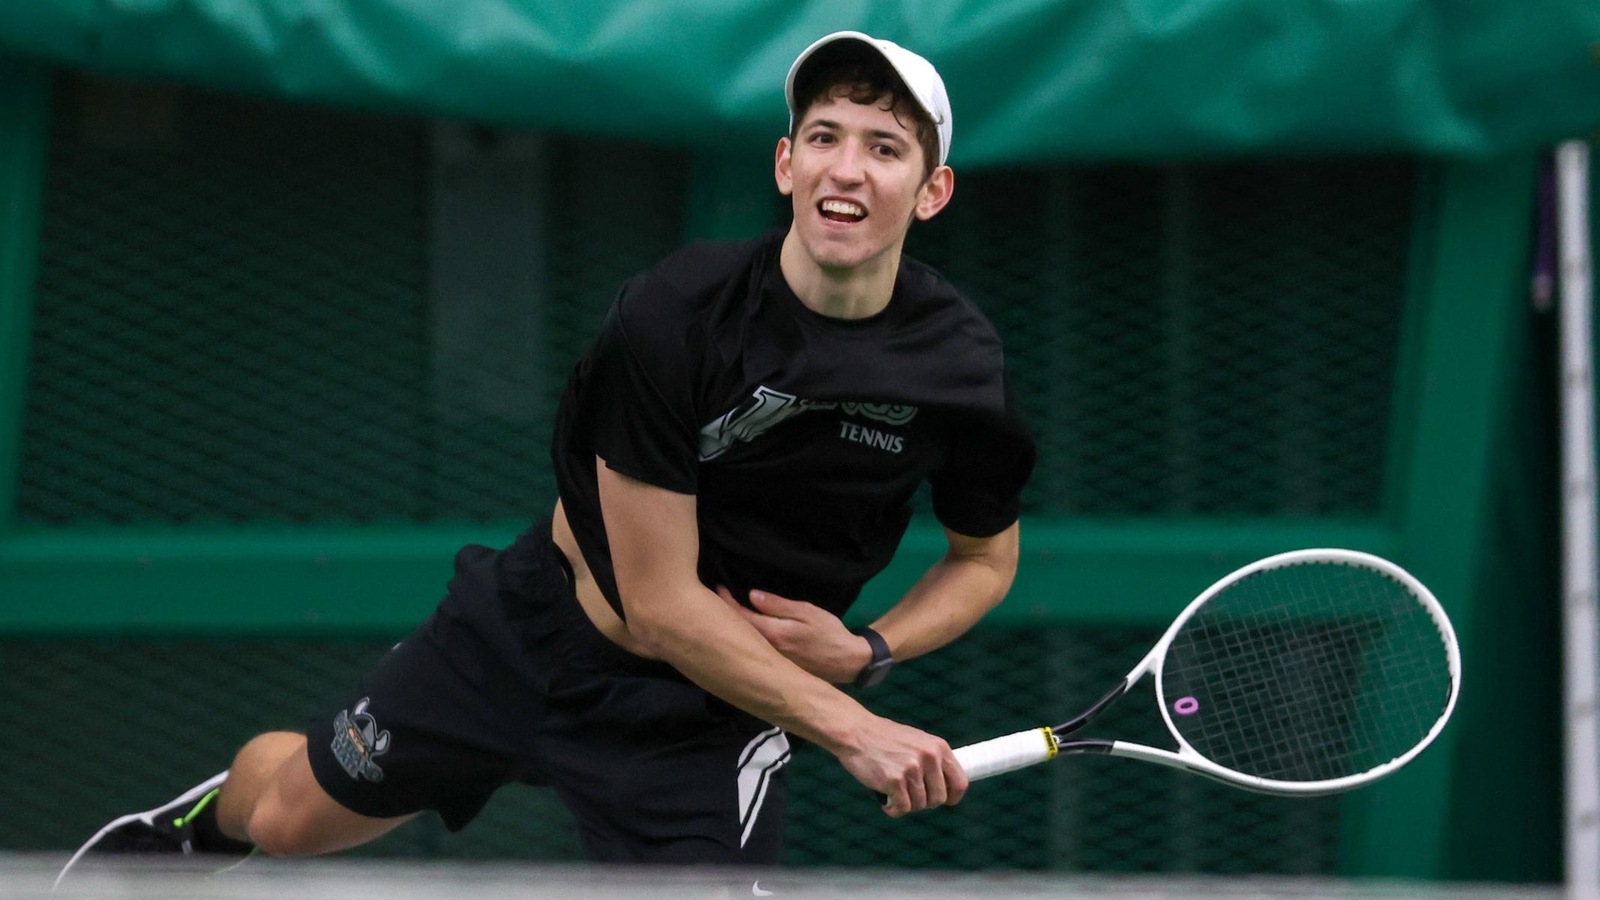 Men’s Tennis Improves To 4-0 In #HLTennis Play With 6-1 Win Over Youngstown State